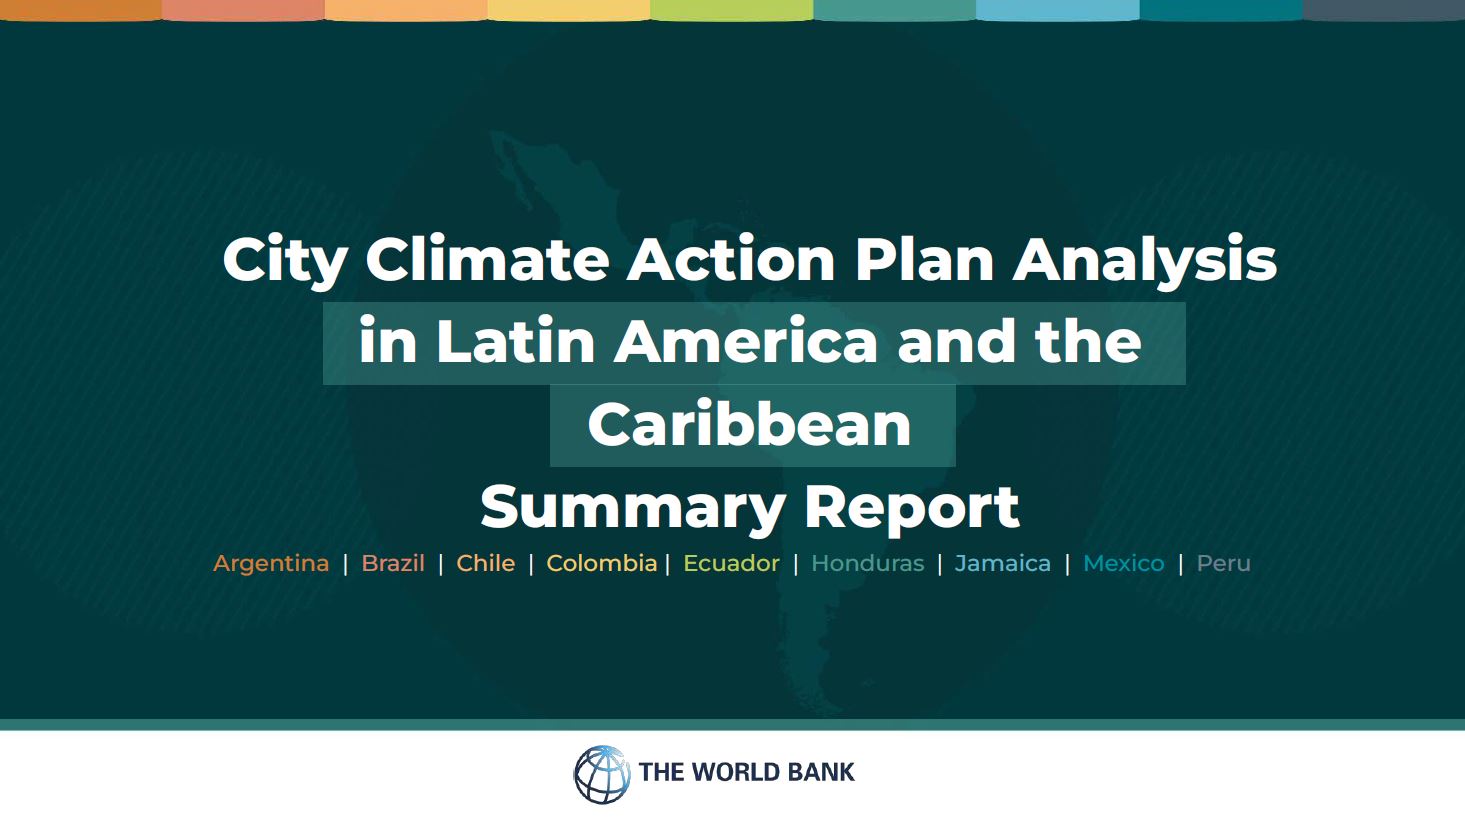 City Climate Action Plan Analysis in Latin America and the Caribbean: Summary Report